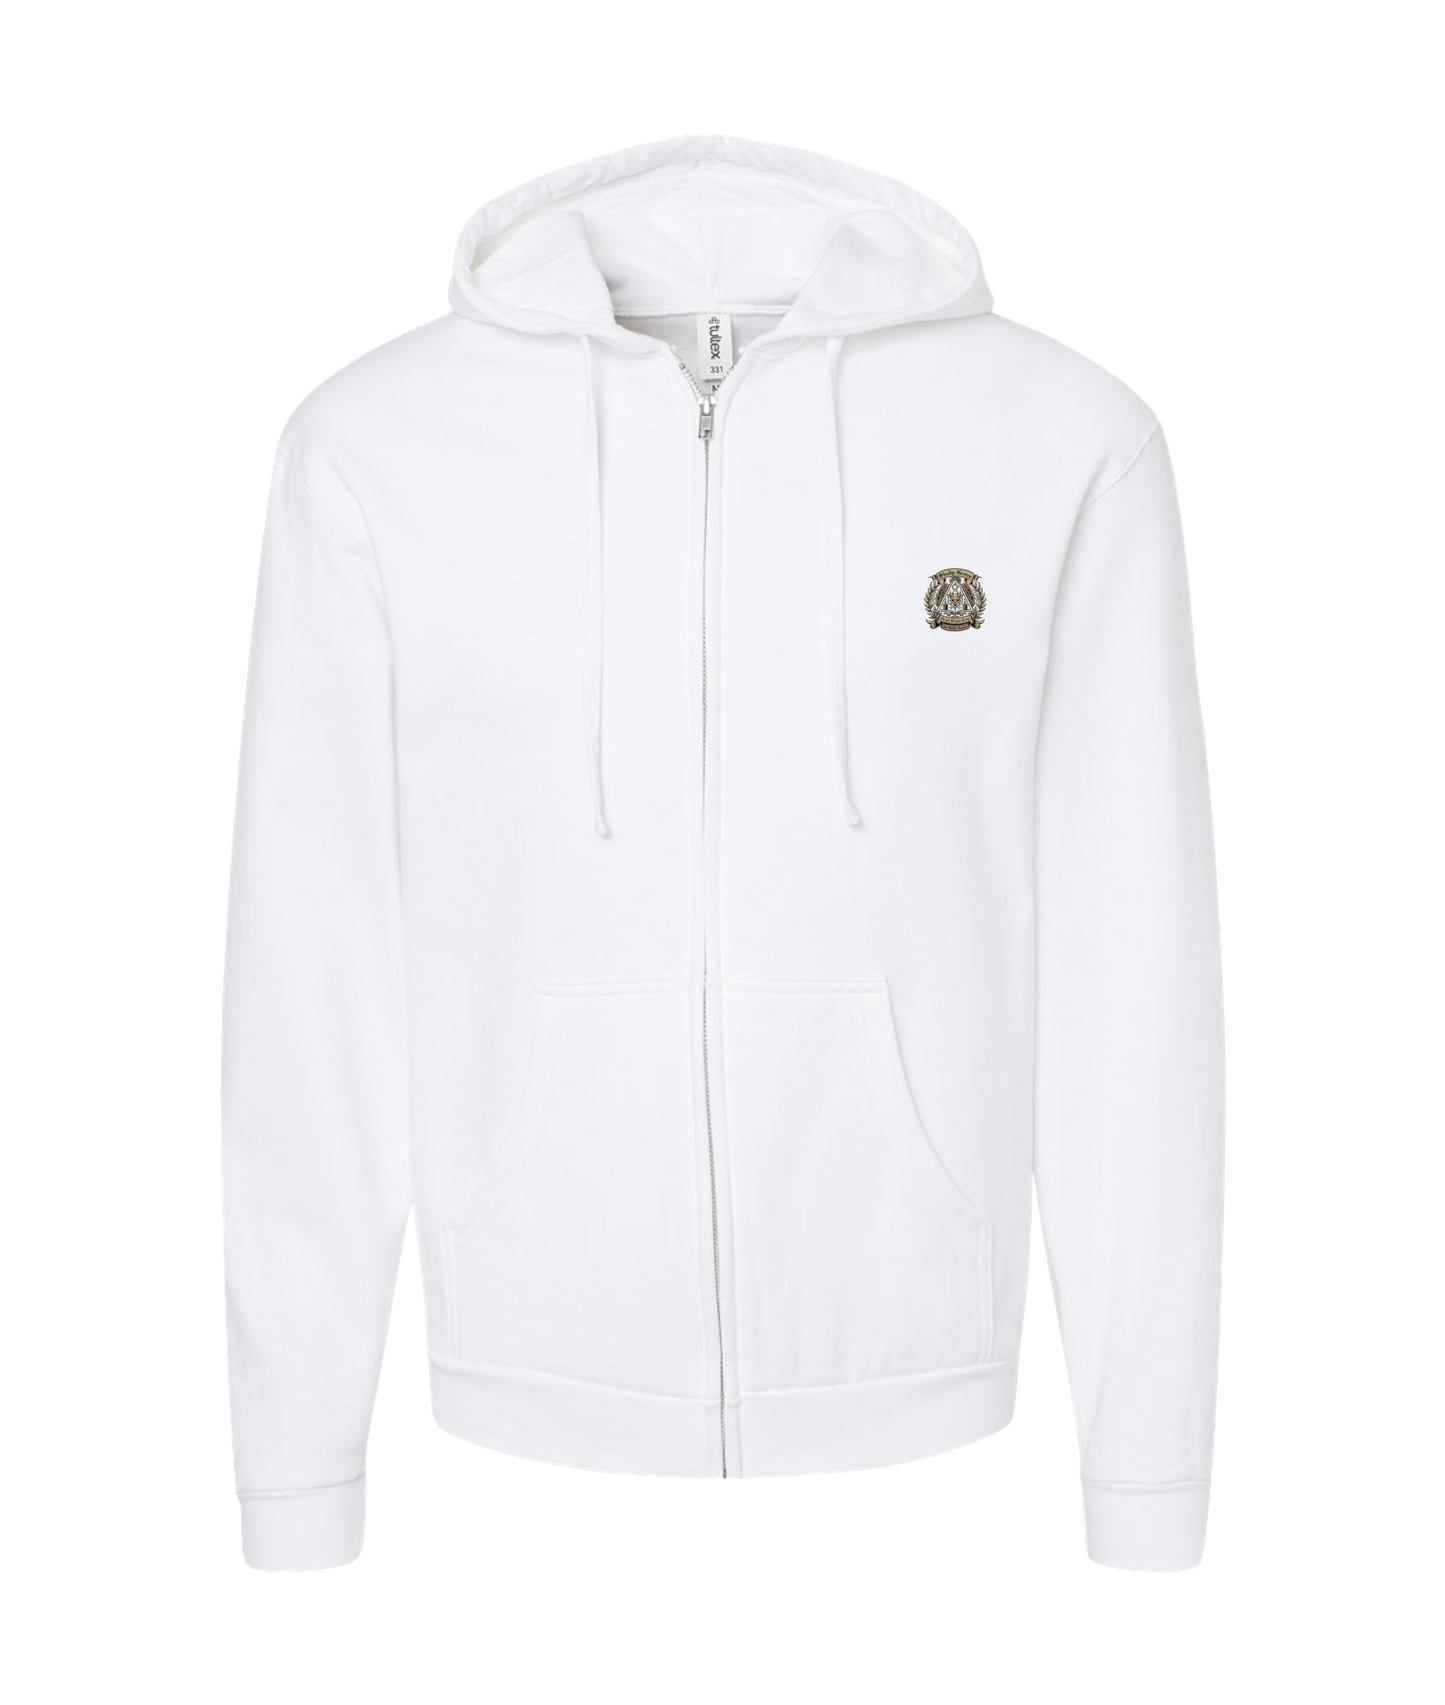 All Father Games - SHADY GROVE - White Zip Up Hoodie